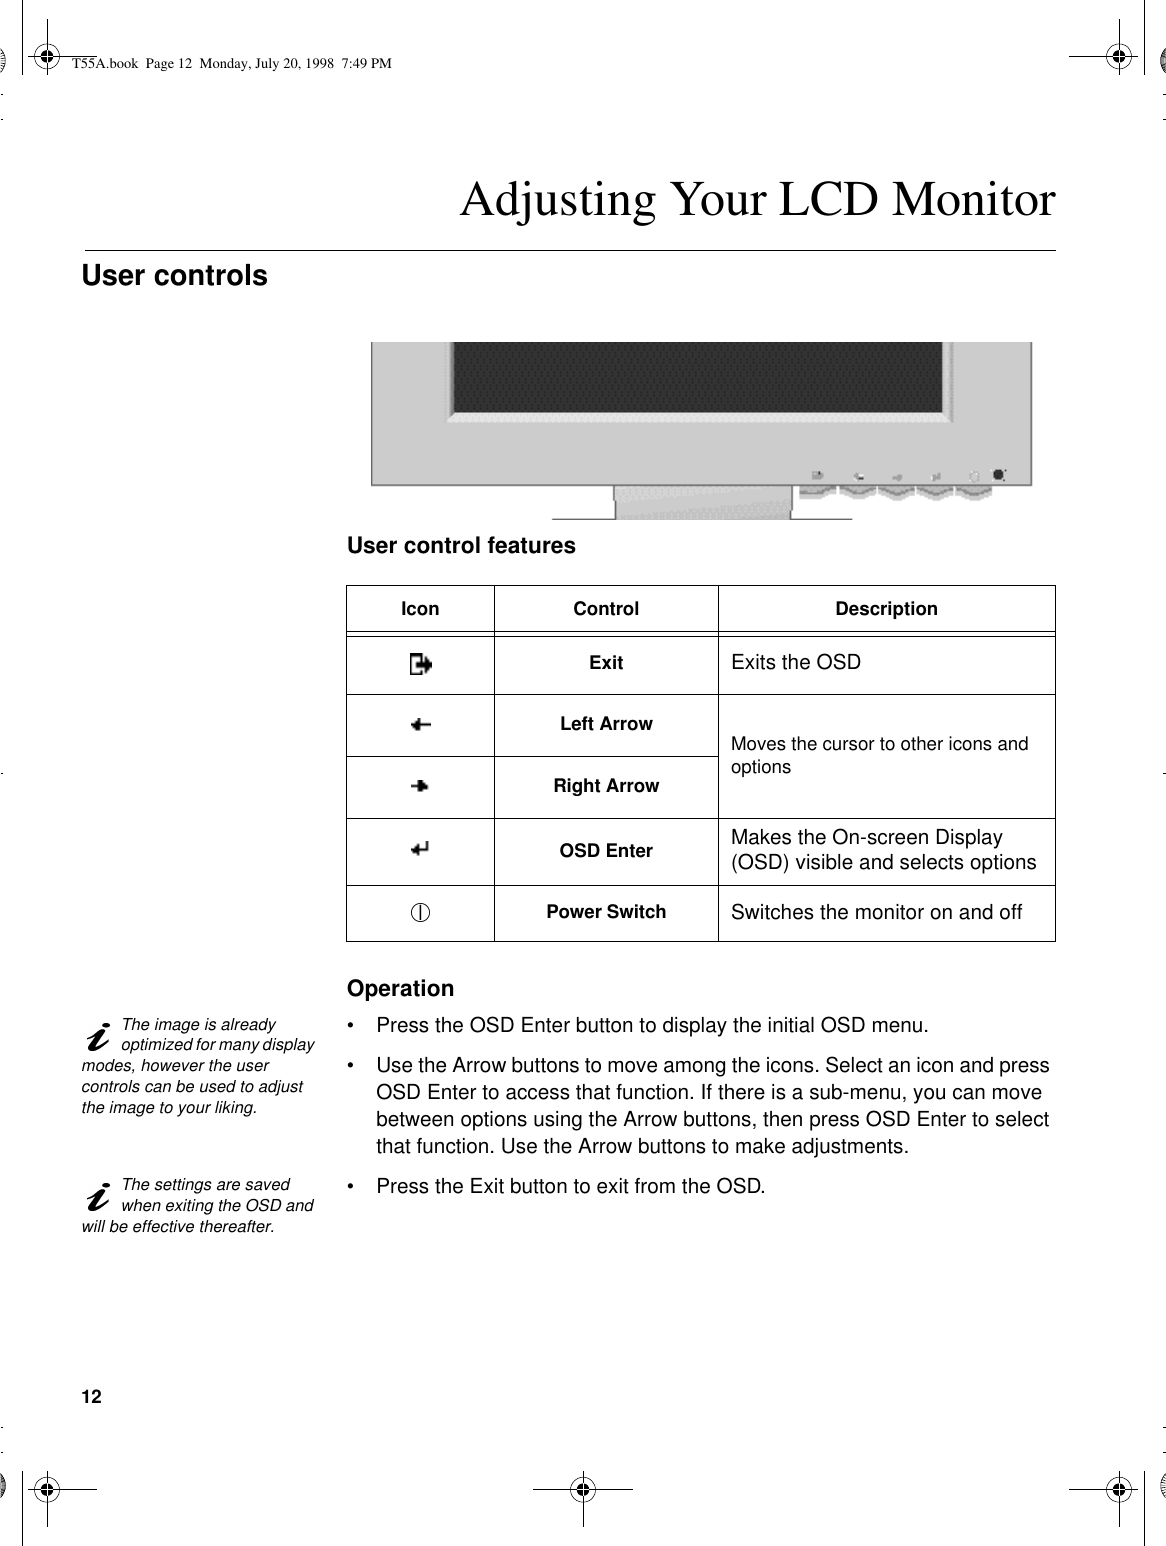 12Adjusting Your LCD MonitorUser controls User control featuresOperationThe image is already optimized for many display modes, however the user controls can be used to adjust the image to your liking.•Press the OSD Enter button to display the initial OSD menu.•Use the Arrow buttons to move among the icons. Select an icon and press OSD Enter to access that function. If there is a sub-menu, you can move between options using the Arrow buttons, then press OSD Enter to select that function. Use the Arrow buttons to make adjustments.The settings are saved when exiting the OSD and will be effective thereafter.•Press the Exit button to exit from the OSD.Icon Control DescriptionExit Exits the OSDLeft Arrow Moves the cursor to other icons and optionsRight ArrowOSD Enter Makes the On-screen Display (OSD) visible and selects optionsPower Switch Switches the monitor on and offT55A.book  Page 12  Monday, July 20, 1998  7:49 PM